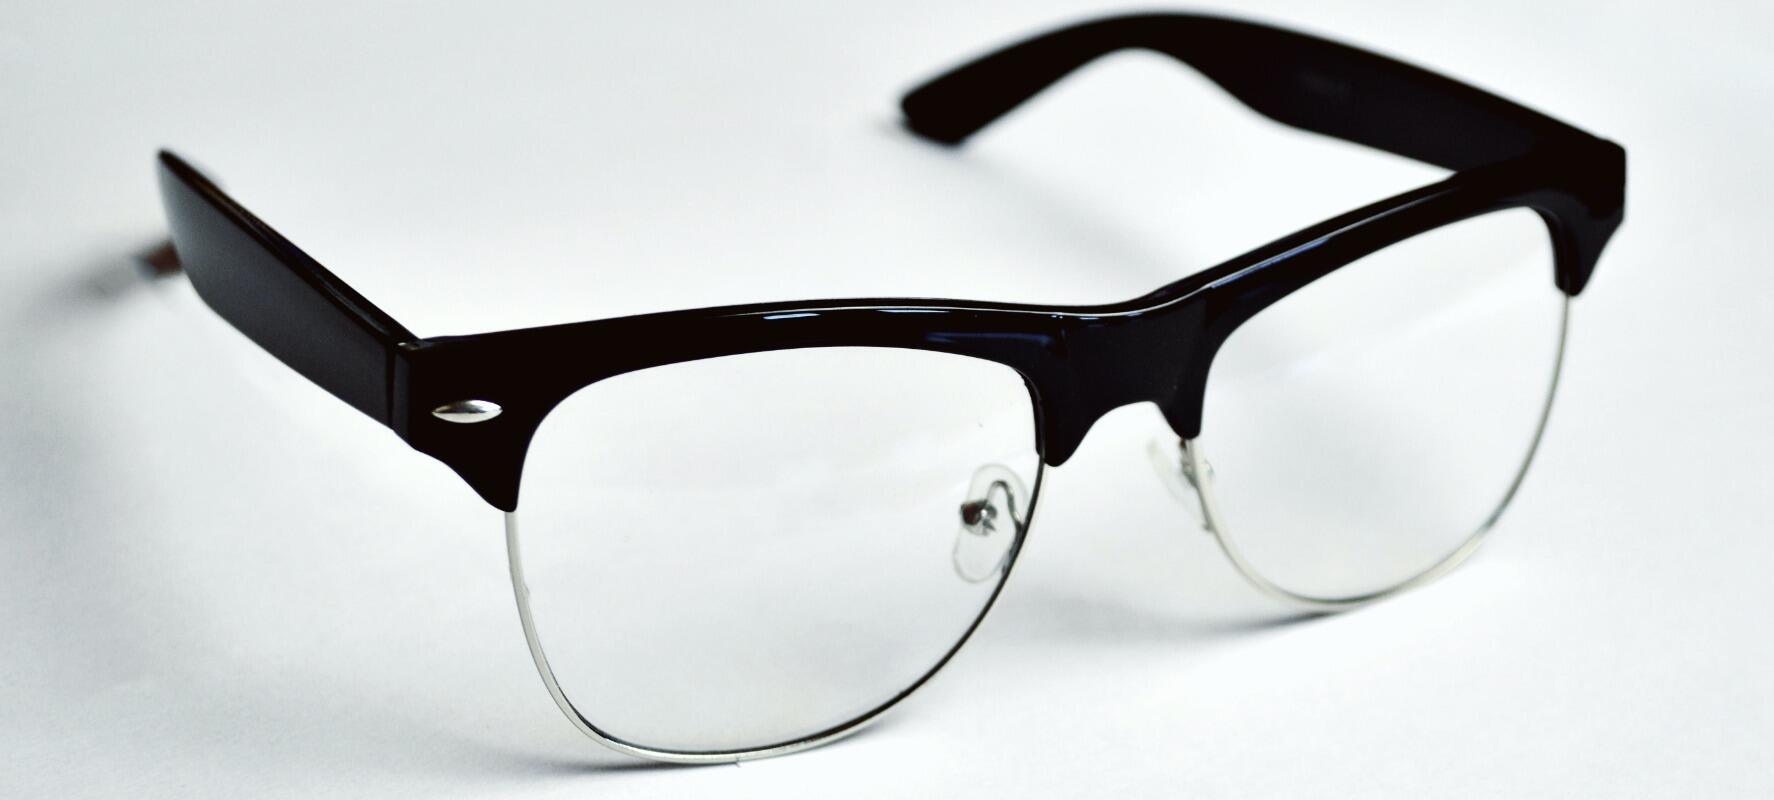 Do You Need Anti Scratch Coating on Your Glasses?